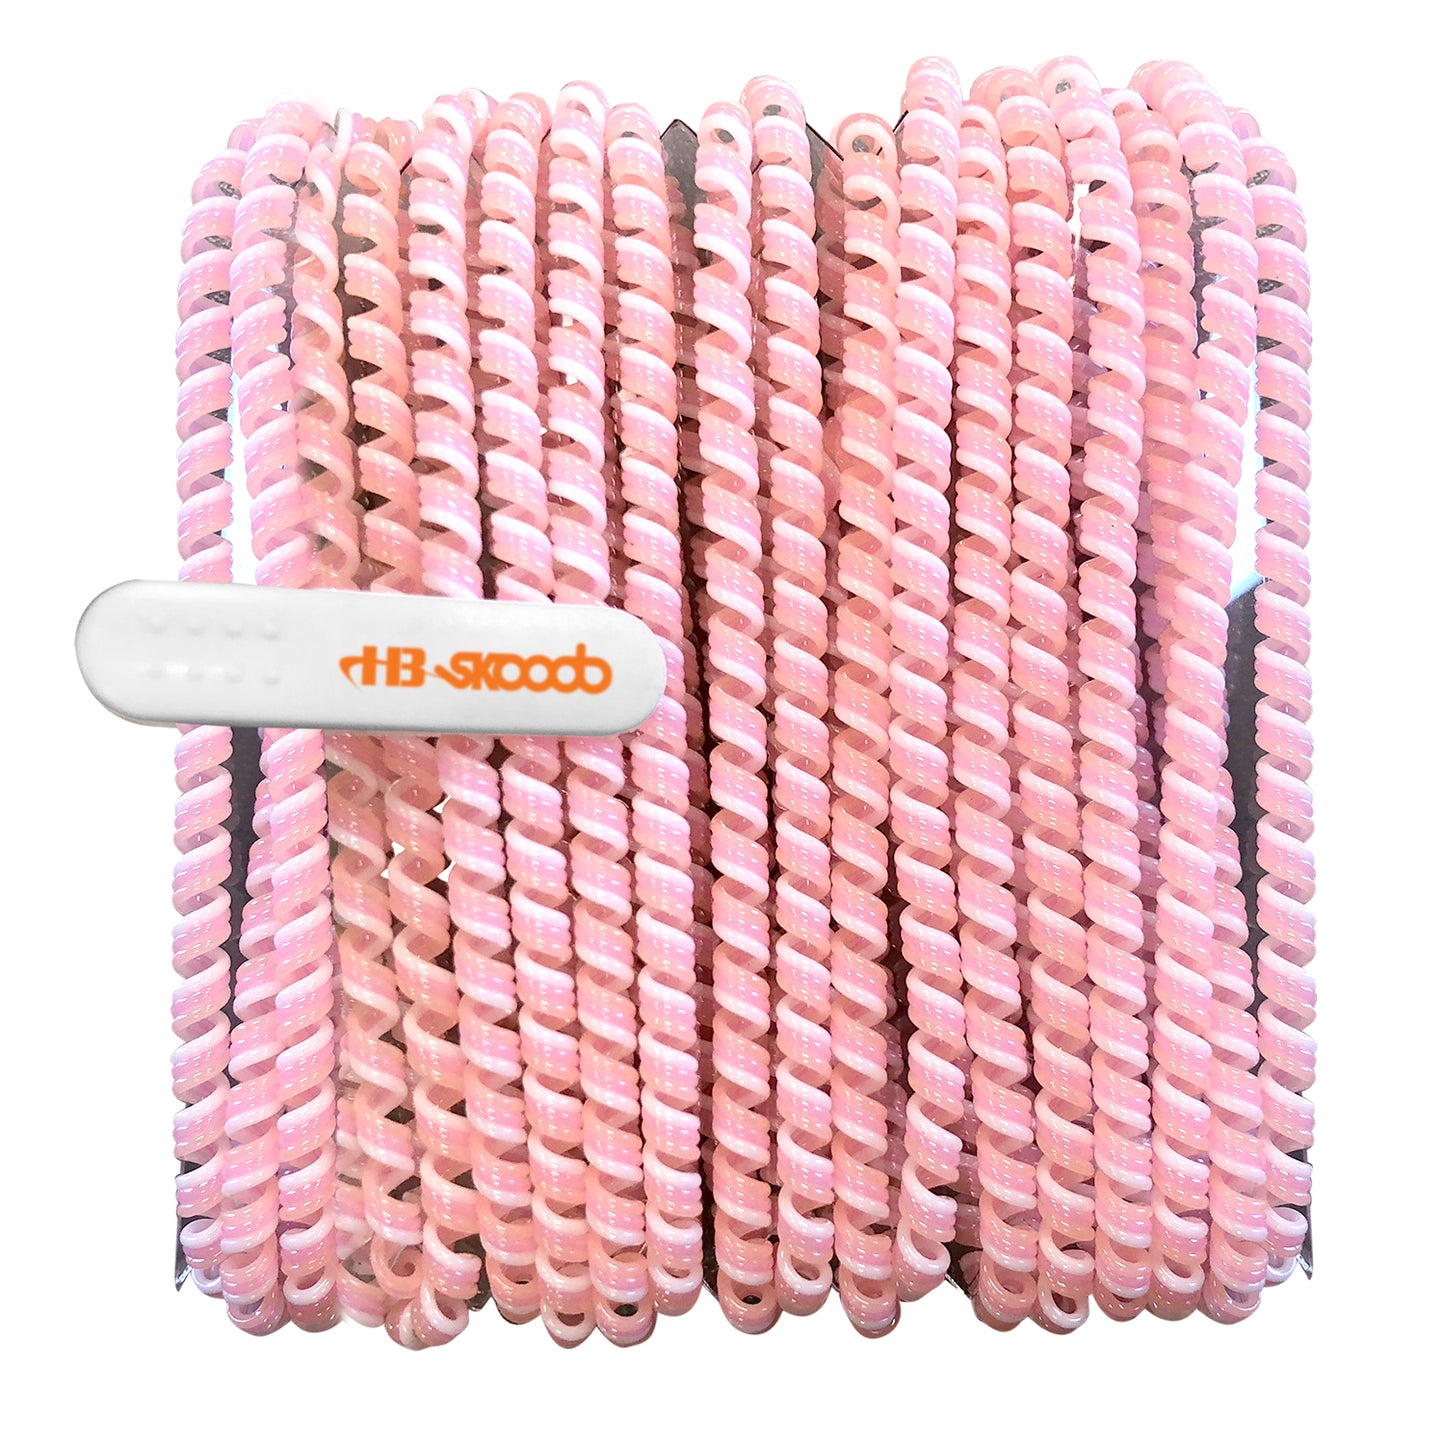 Skooob Tangle Free Earbud Covers - Light Pink/White, Pack of 20